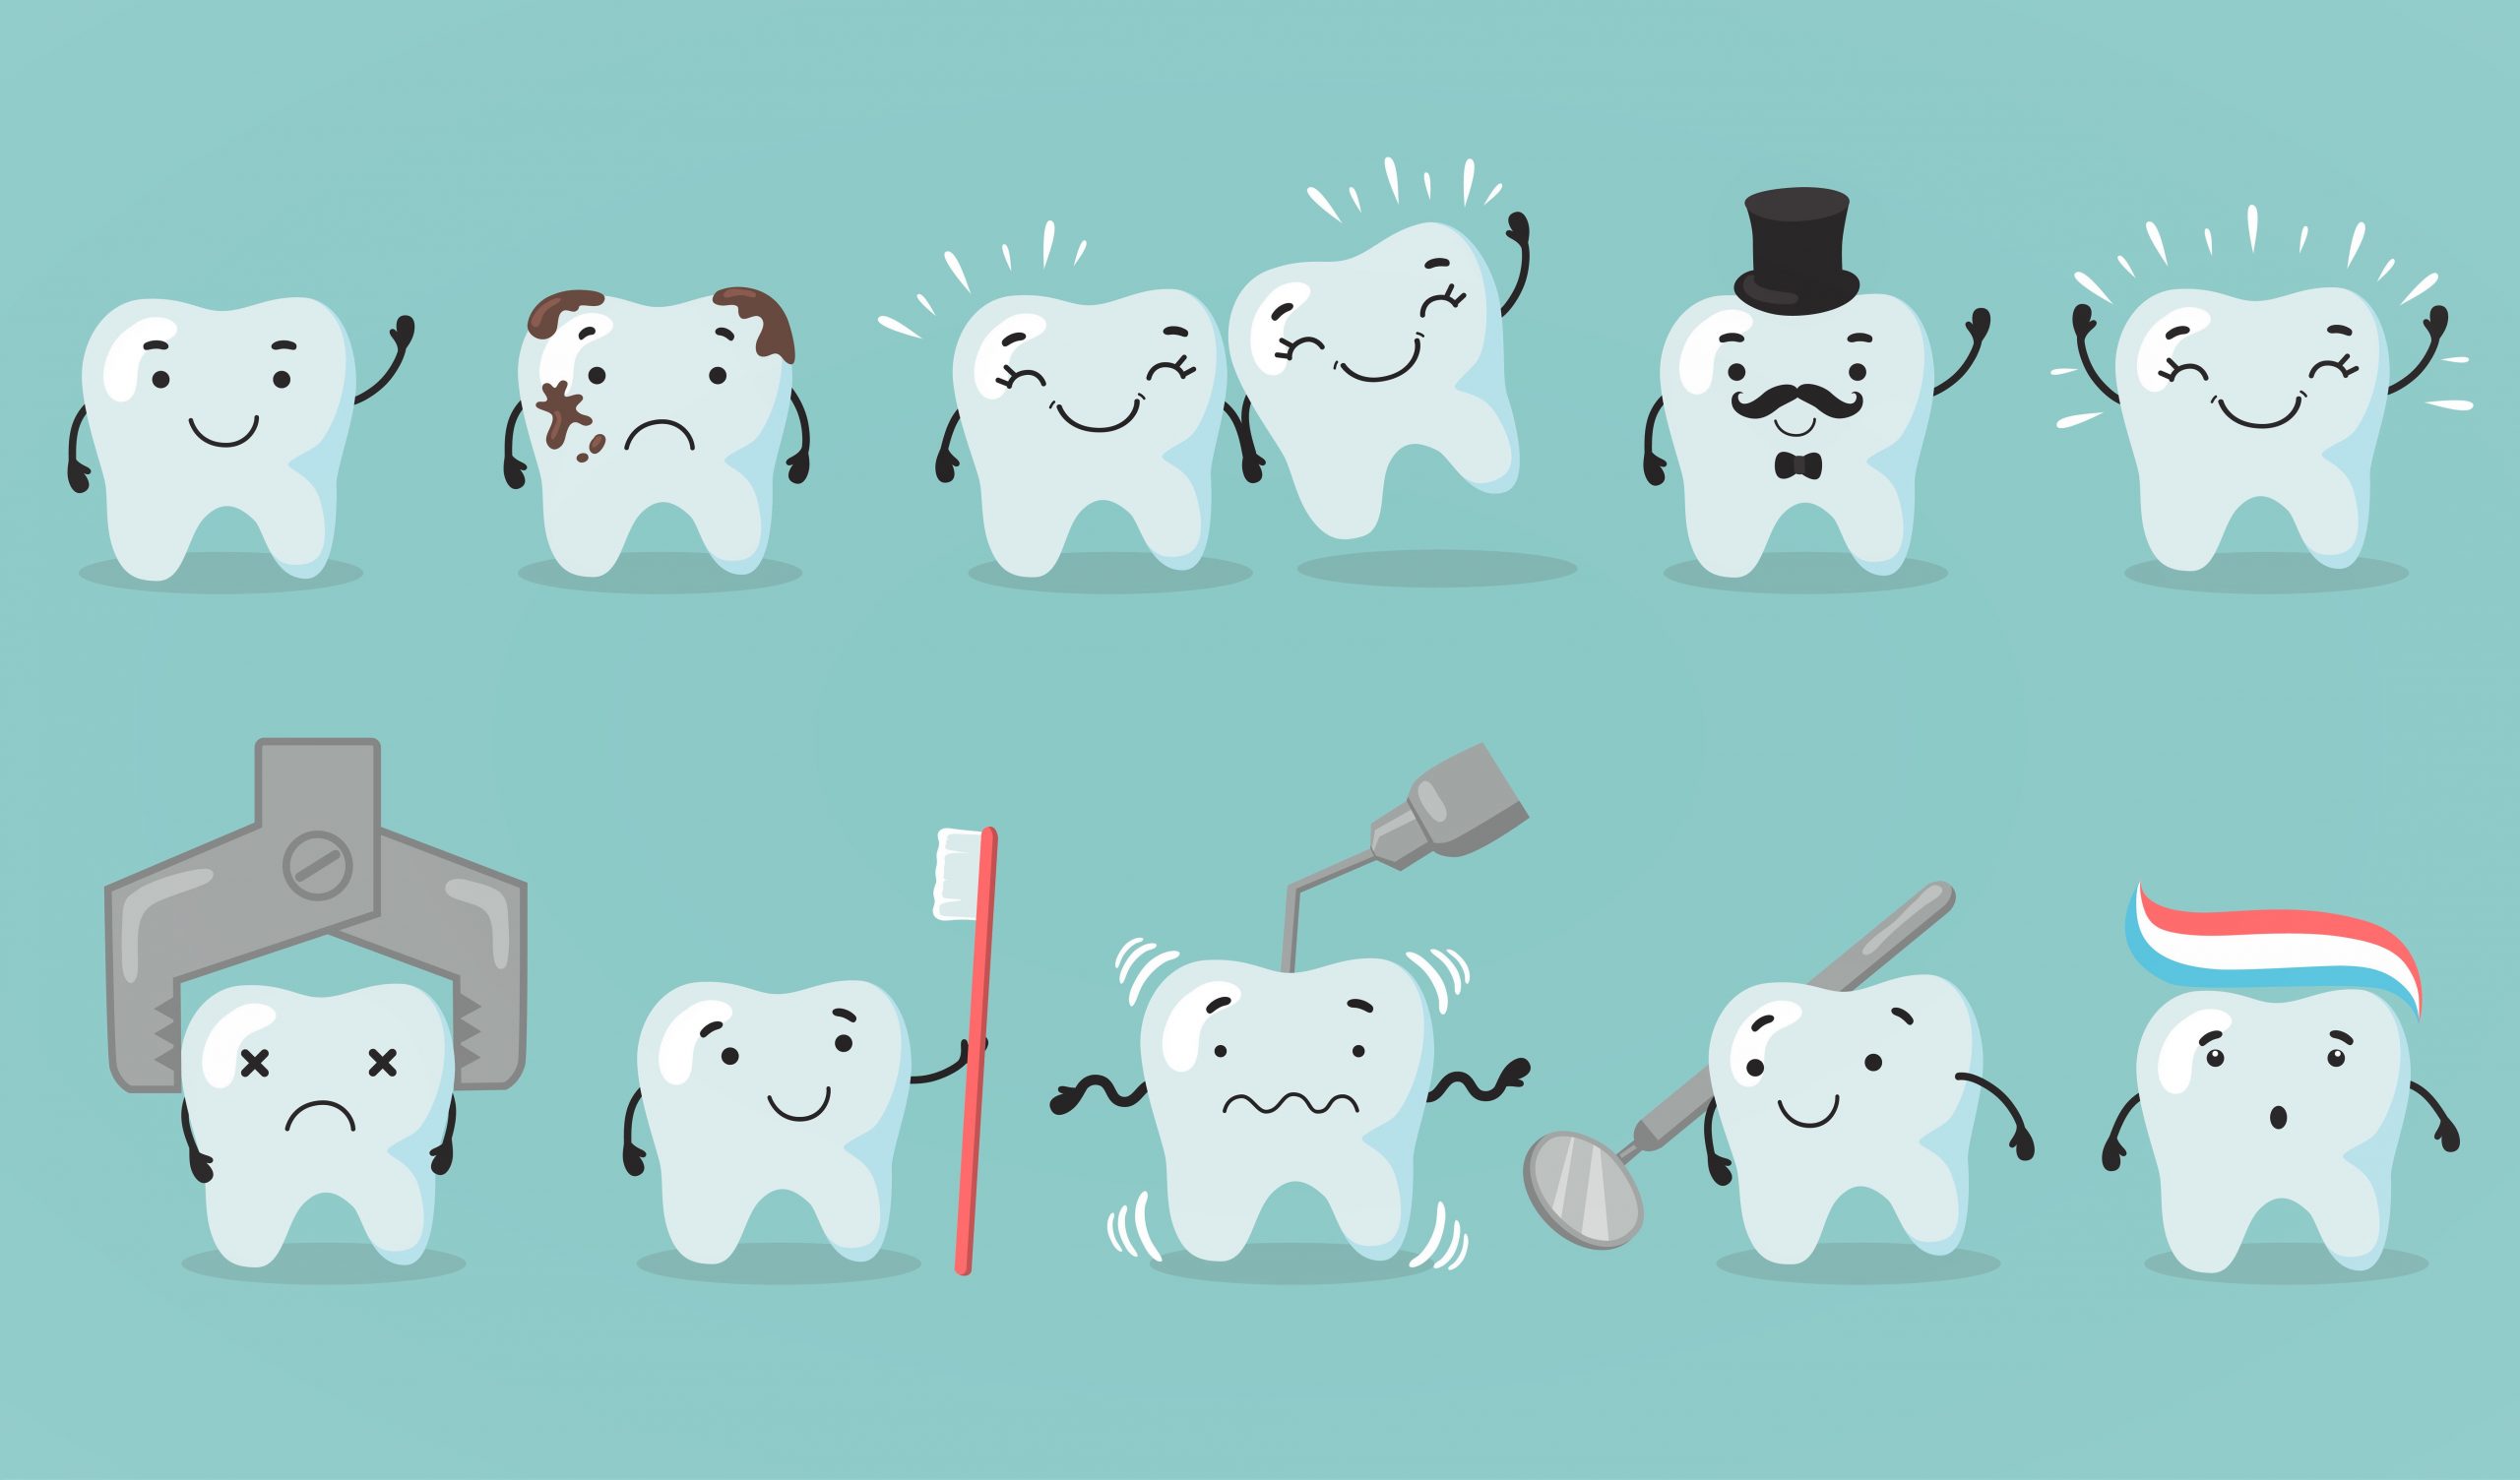 Teeth Care Set. Tooth Cartoon Character Suffering From Cavity. Sad Or Happy Shiny Teeth, Dentist Tools, Toothbrush, Dental Care. Flat Vector Illustration.